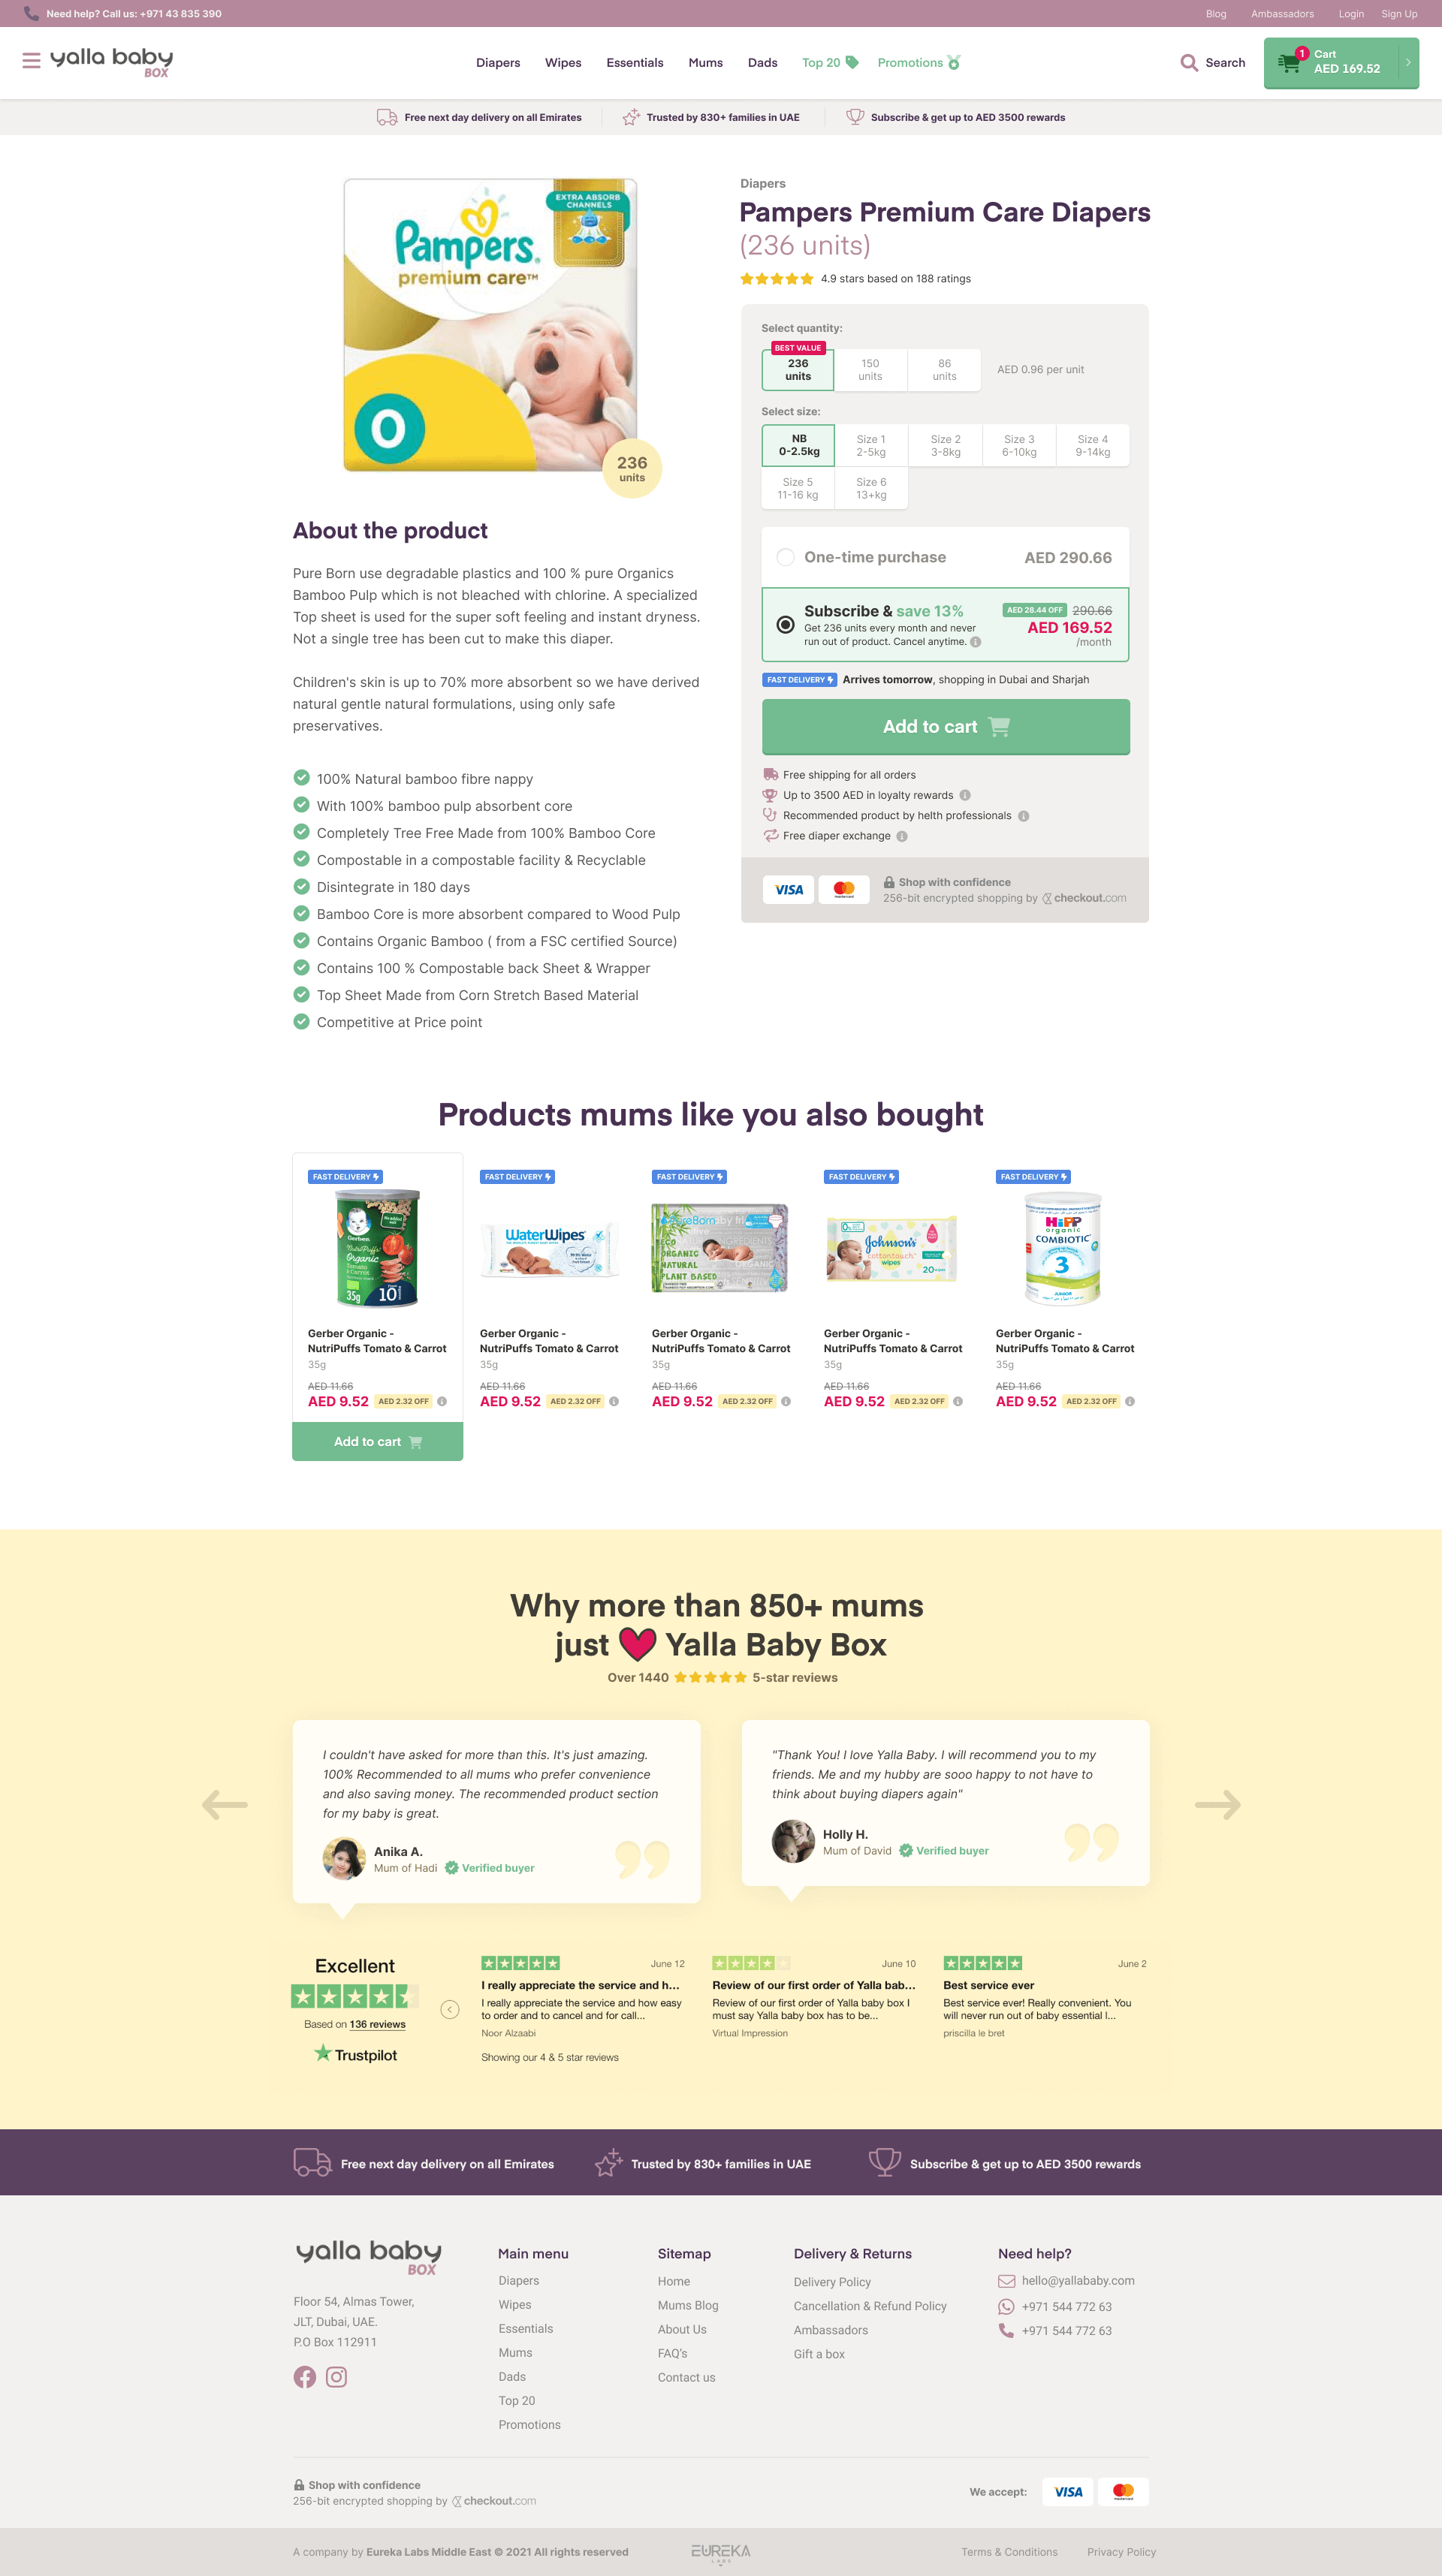 Product page with subscription